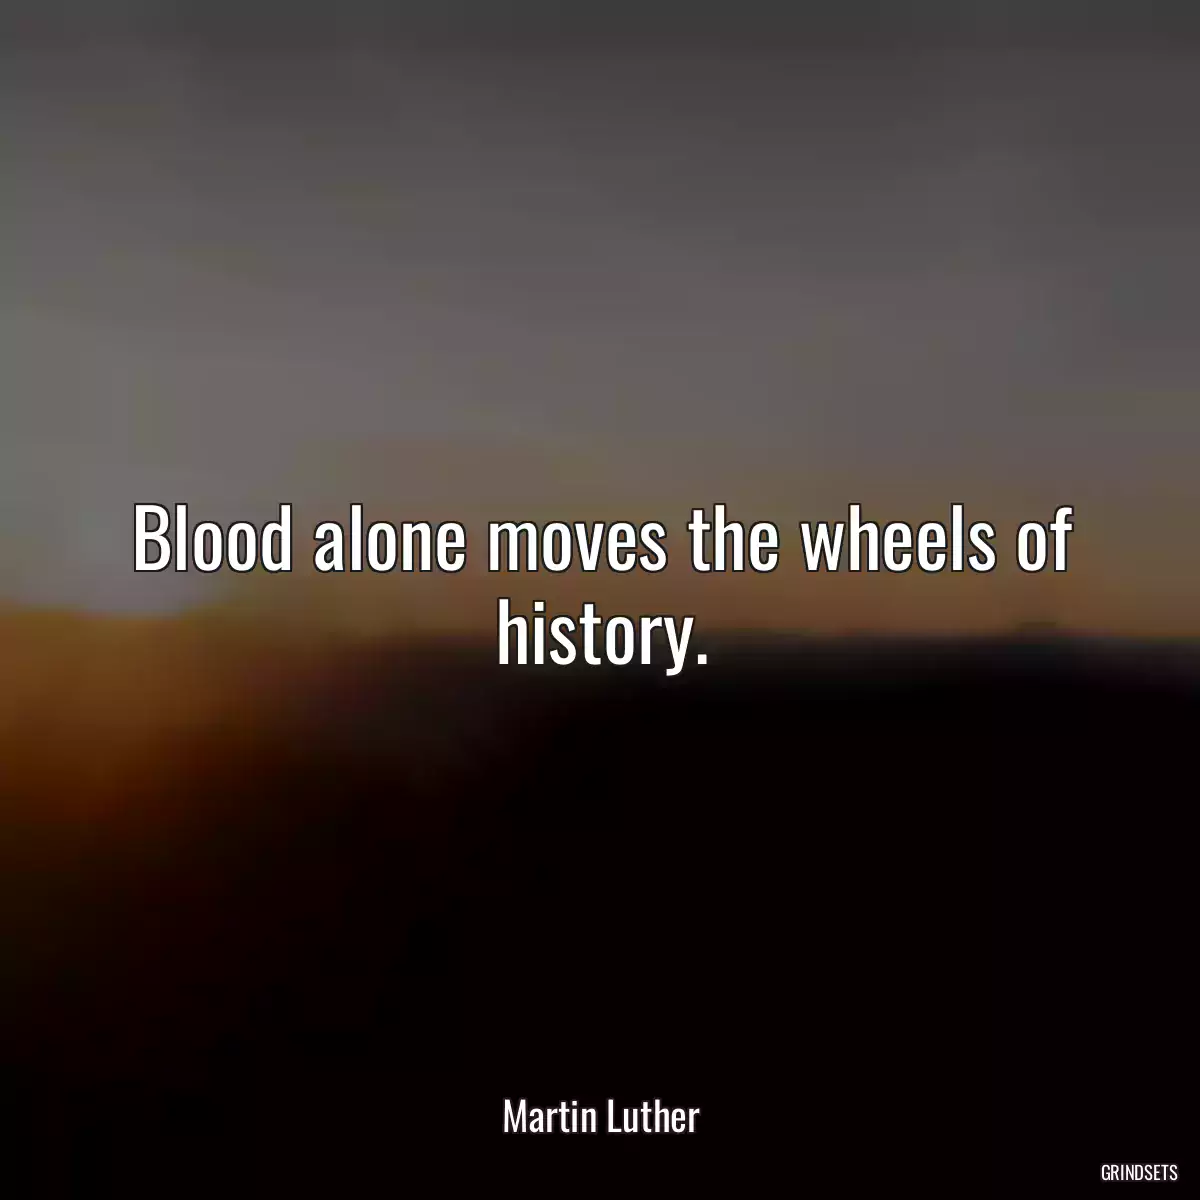 Blood alone moves the wheels of history.